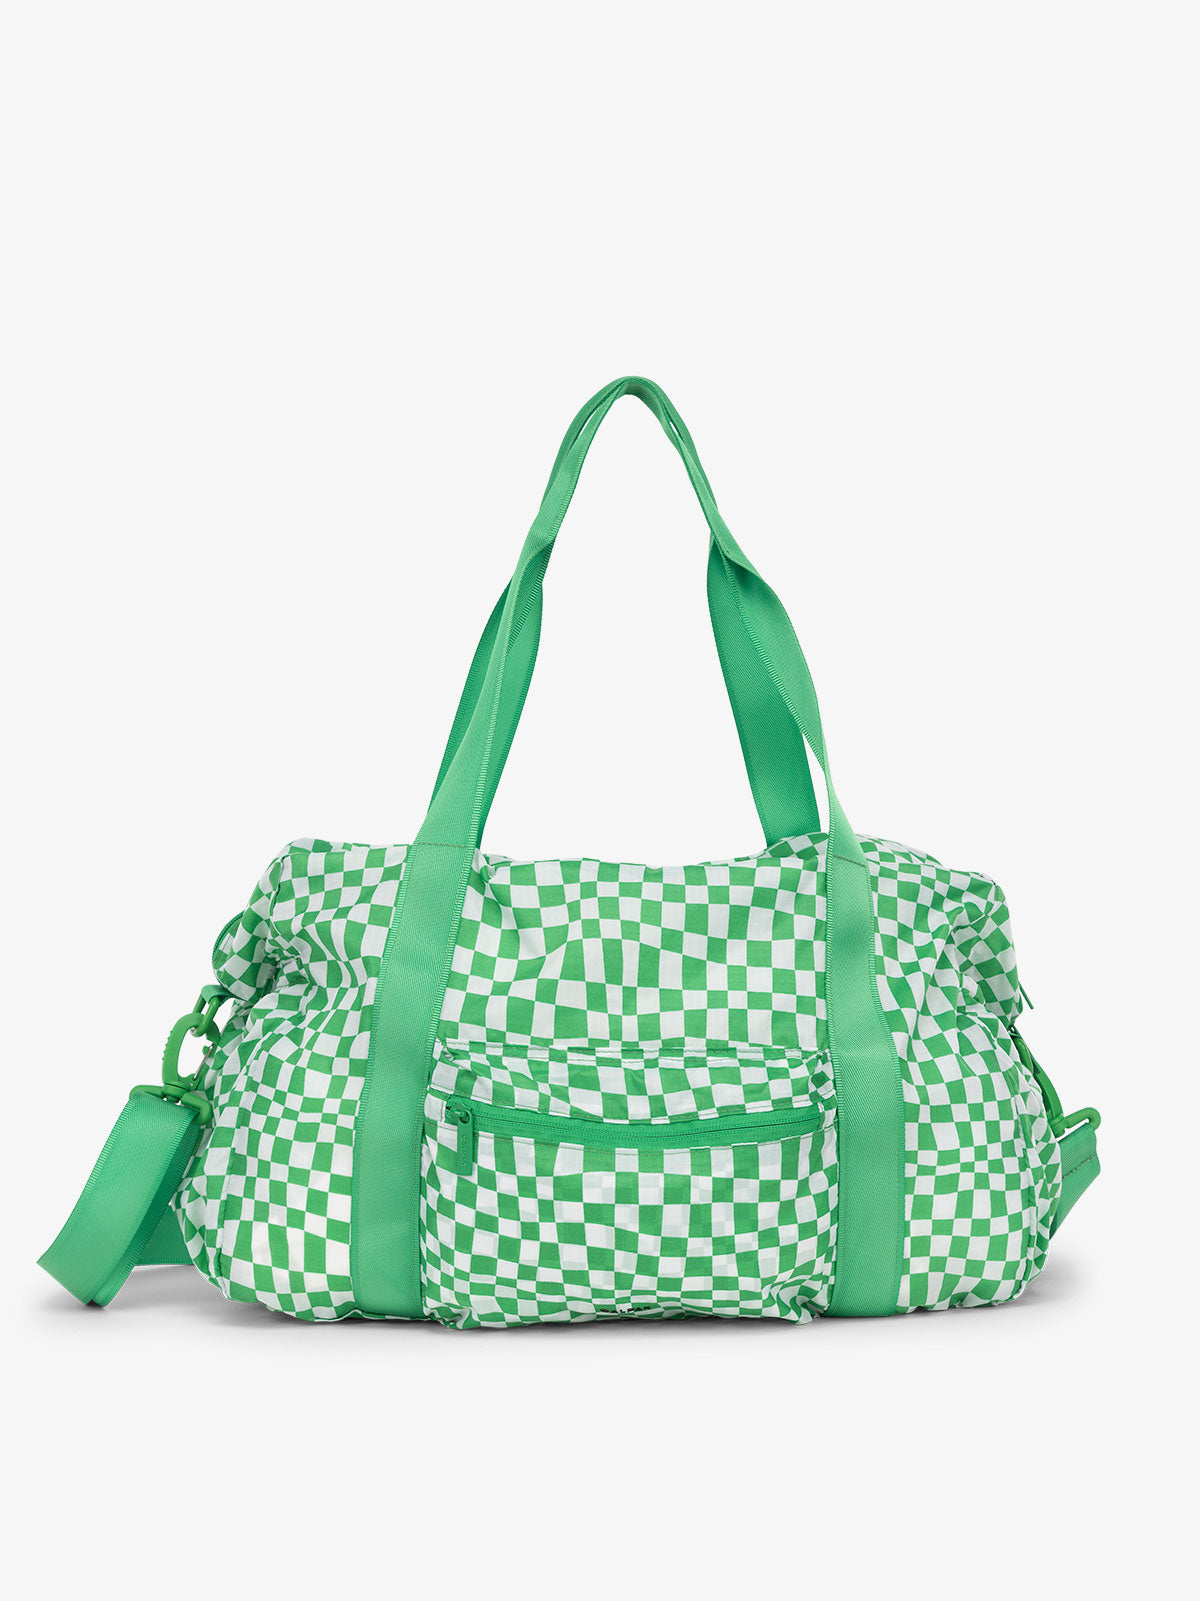 CALPAK Compakt duffel bag with removable crossbody strap and water resistant fabric in light green checker print